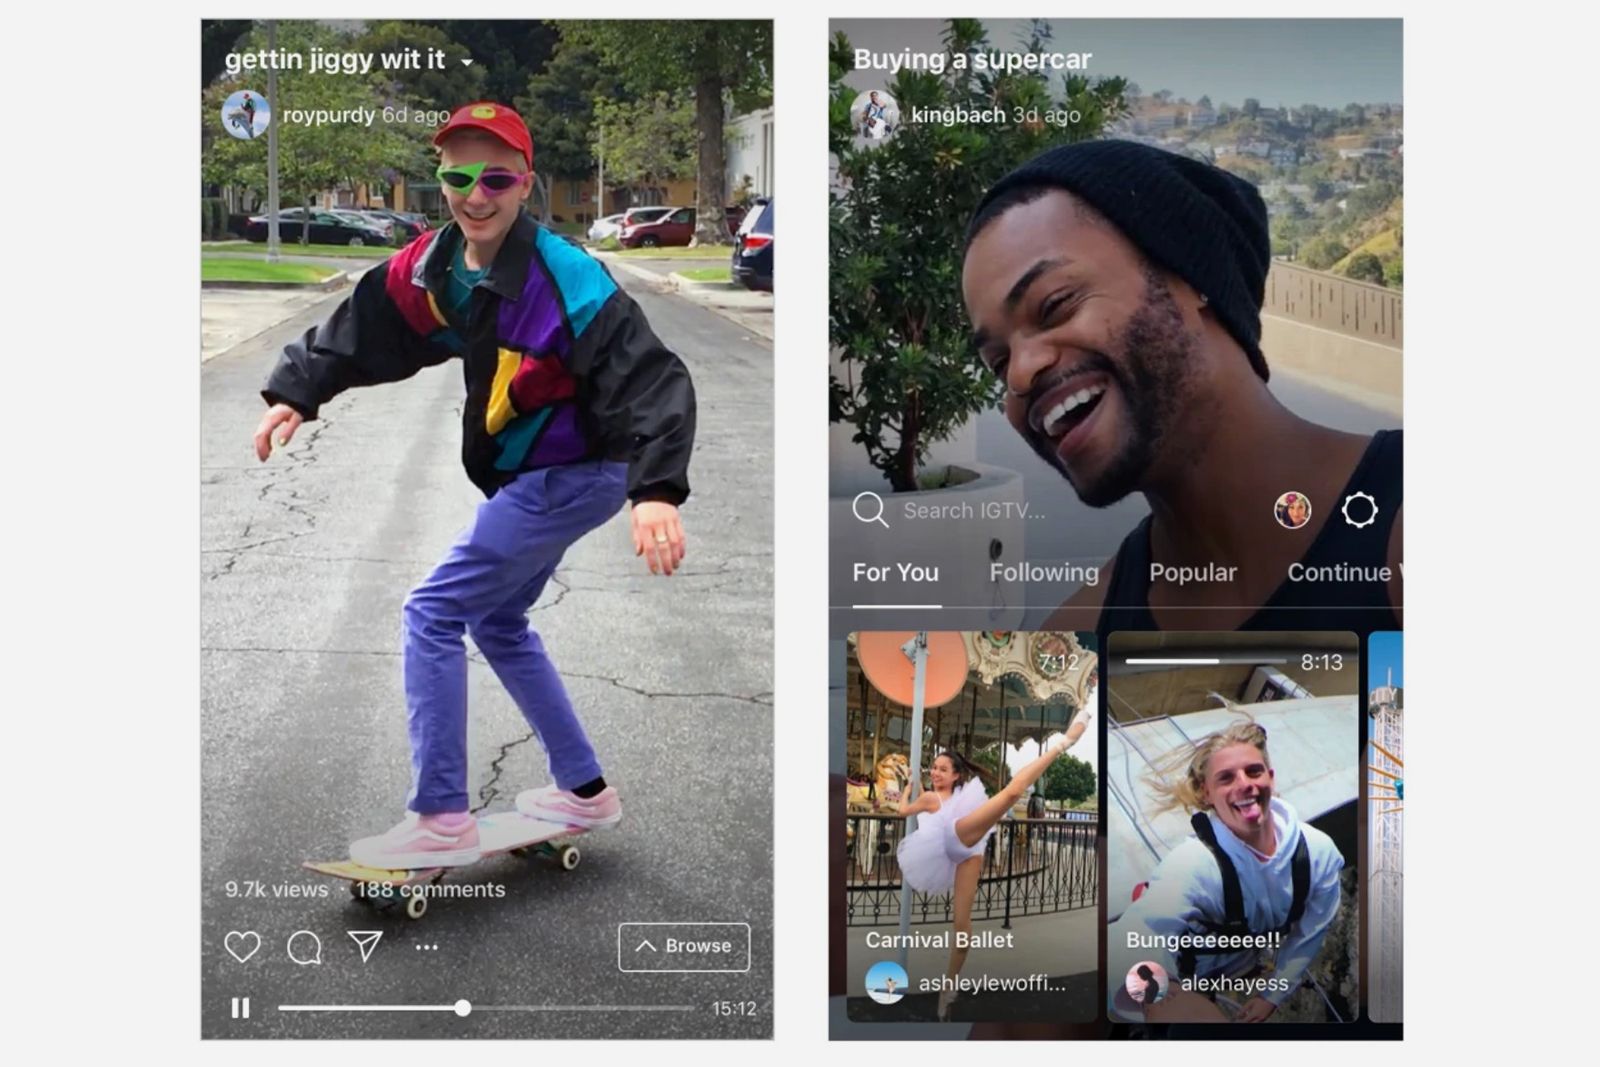 Igtv Everything You Need To Know About Instagrams Video App image 3